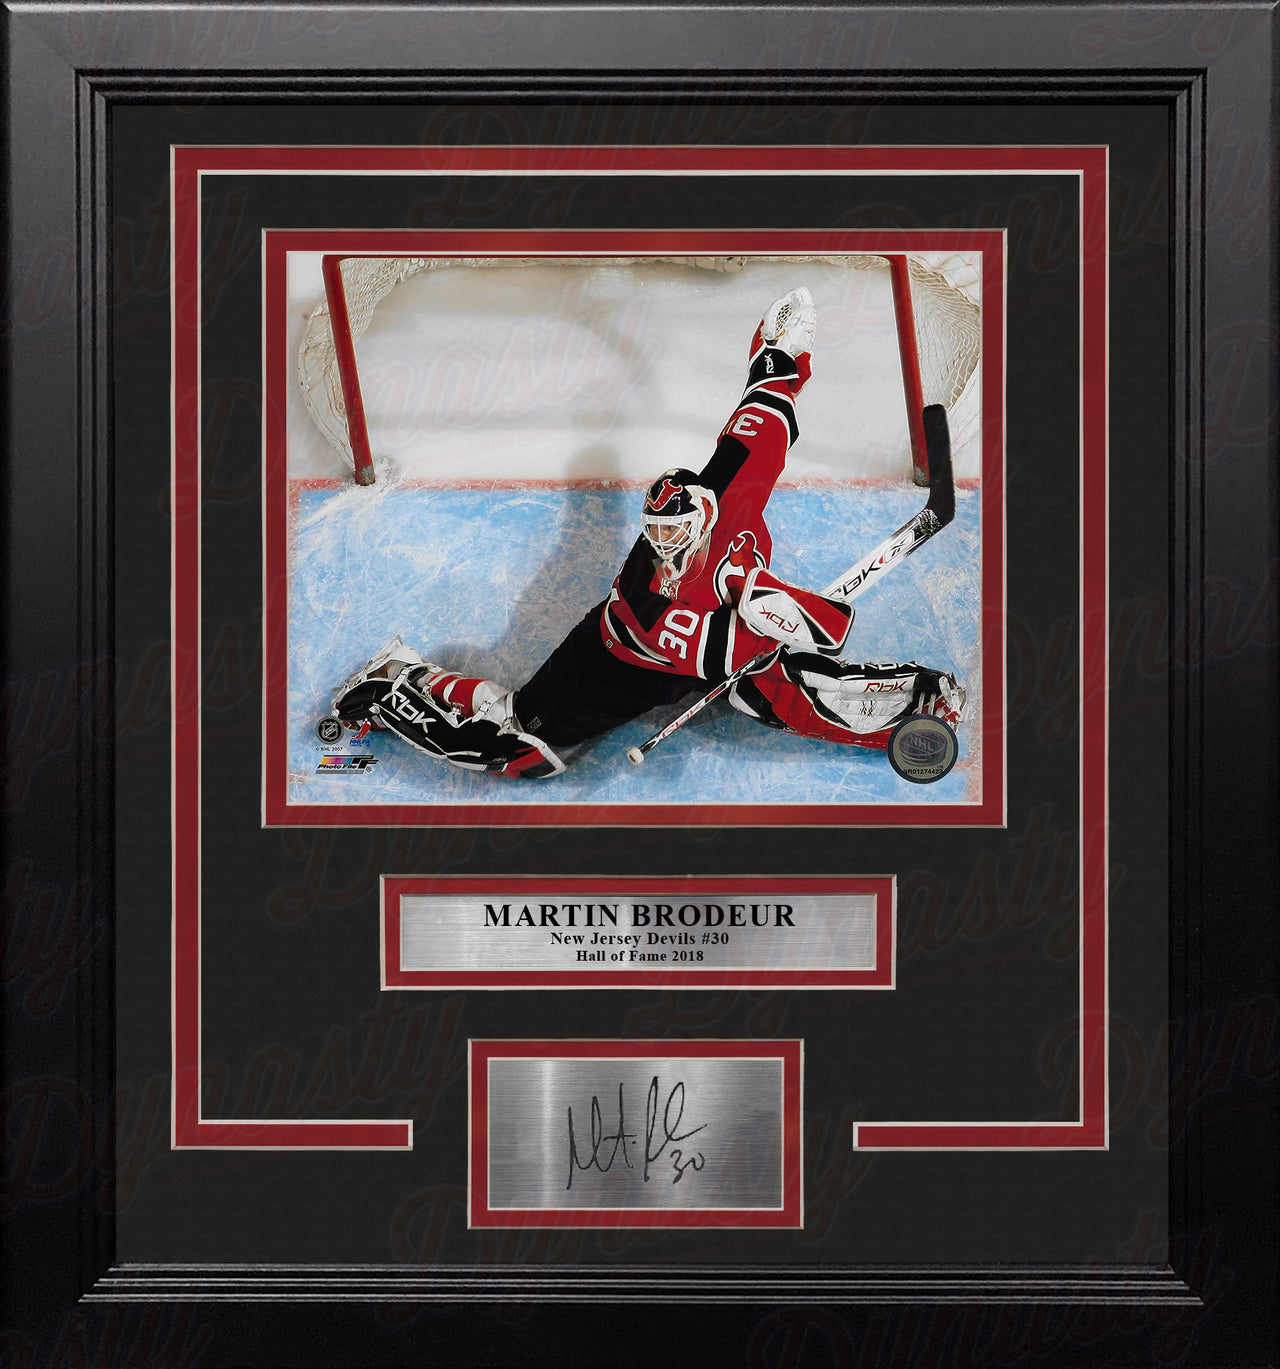 Martin Brodeur Save New Jersey Devils 8" x 10" Framed Hockey Photo with Engraved Autograph